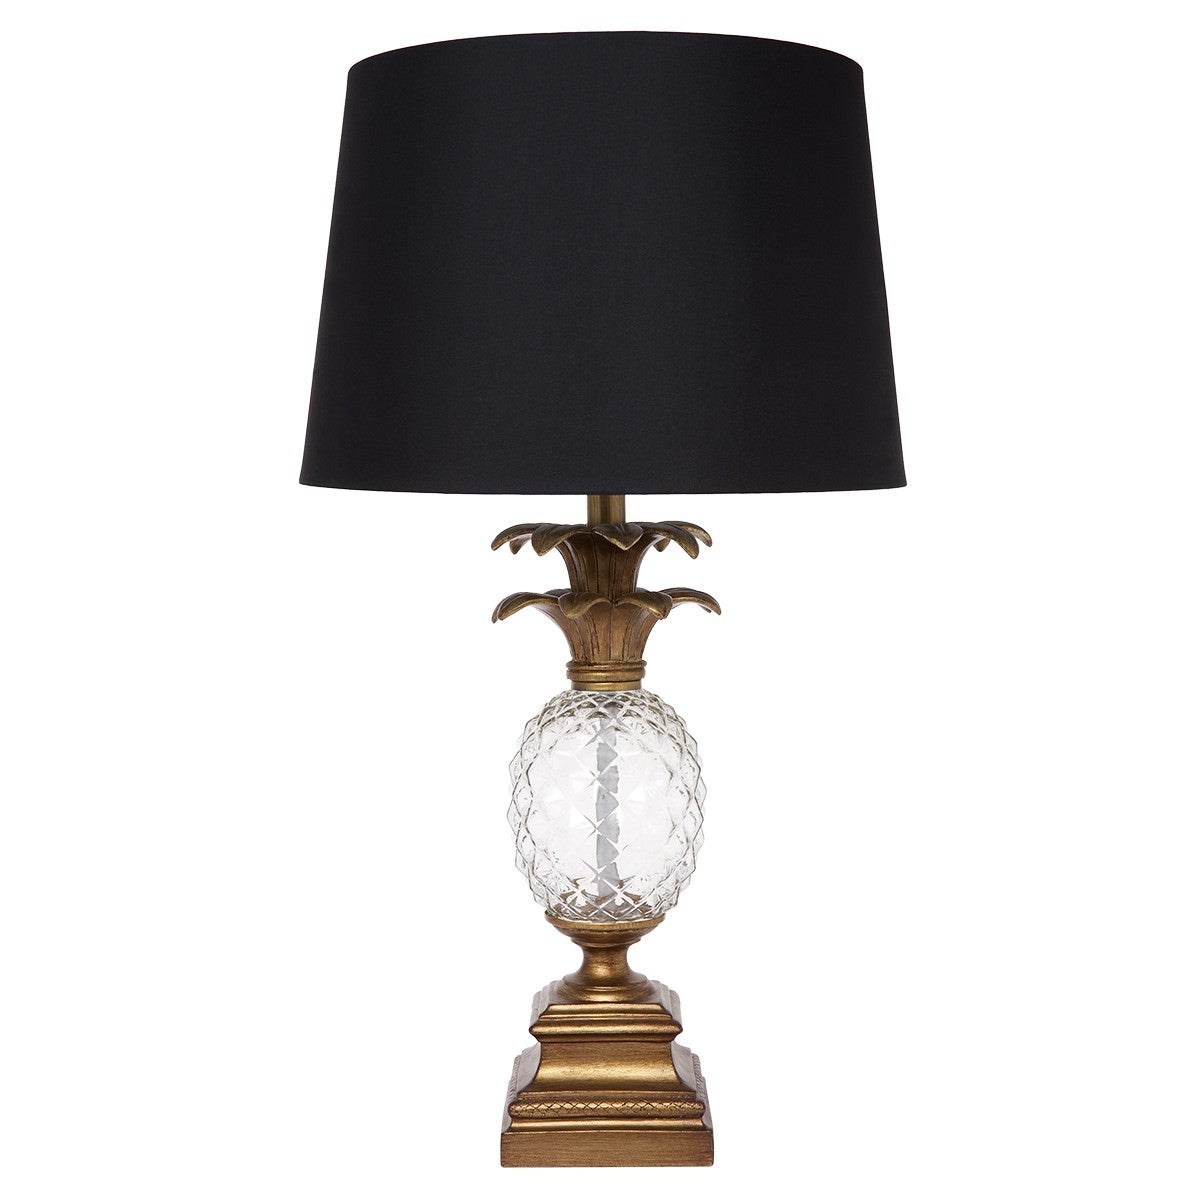 Langley Cut Glass Pineapple Base Table Lamp , Antique Gold